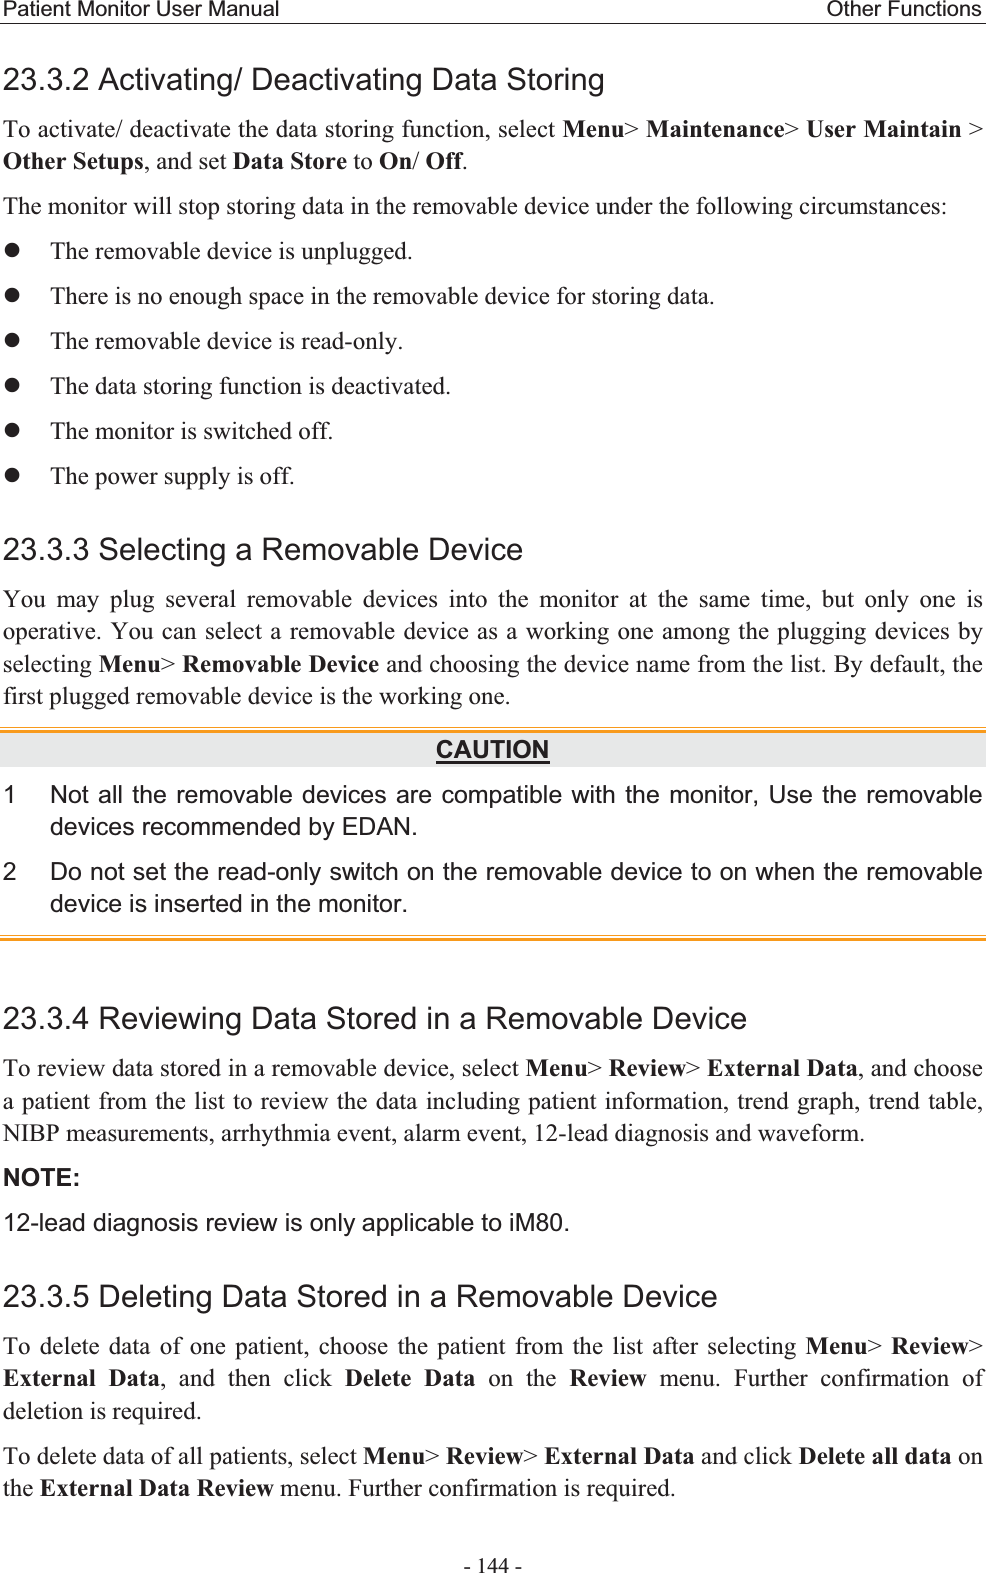 Patient Monitor User Manual                                                  Other Functions  - 144 - 23.3.2 Activating/ Deactivating Data Storing To activate/ deactivate the data storing function, select Menu&gt; Maintenance&gt; User Maintain &gt; Other Setups, and set Data Store to On/ Off. The monitor will stop storing data in the removable device under the following circumstances: zThe removable device is unplugged. zThere is no enough space in the removable device for storing data. zThe removable device is read-only. zThe data storing function is deactivated. zThe monitor is switched off. zThe power supply is off. 23.3.3 Selecting a Removable Device You may plug several removable devices into the monitor at the same time, but only one is operative. You can select a removable device as a working one among the plugging devices by selecting Menu&gt; Removable Device and choosing the device name from the list. By default, the first plugged removable device is the working one. CAUTION1  Not all the removable devices are compatible with the monitor, Use the removable devices recommended by EDAN. 2  Do not set the read-only switch on the removable device to on when the removable device is inserted in the monitor. 23.3.4 Reviewing Data Stored in a Removable Device To review data stored in a removable device, select Menu&gt; Review&gt; External Data, and choose a patient from the list to review the data including patient information, trend graph, trend table, NIBP measurements, arrhythmia event, alarm event, 12-lead diagnosis and waveform. NOTE:12-lead diagnosis review is only applicable to iM80. 23.3.5 Deleting Data Stored in a Removable Device To delete data of one patient, choose the patient from the list after selecting Menu&gt;  Review&gt; External Data, and then click Delete Data on the Review menu. Further confirmation of deletion is required. To delete data of all patients, select Menu&gt; Review&gt; External Data and click Delete all data on the External Data Review menu. Further confirmation is required. 